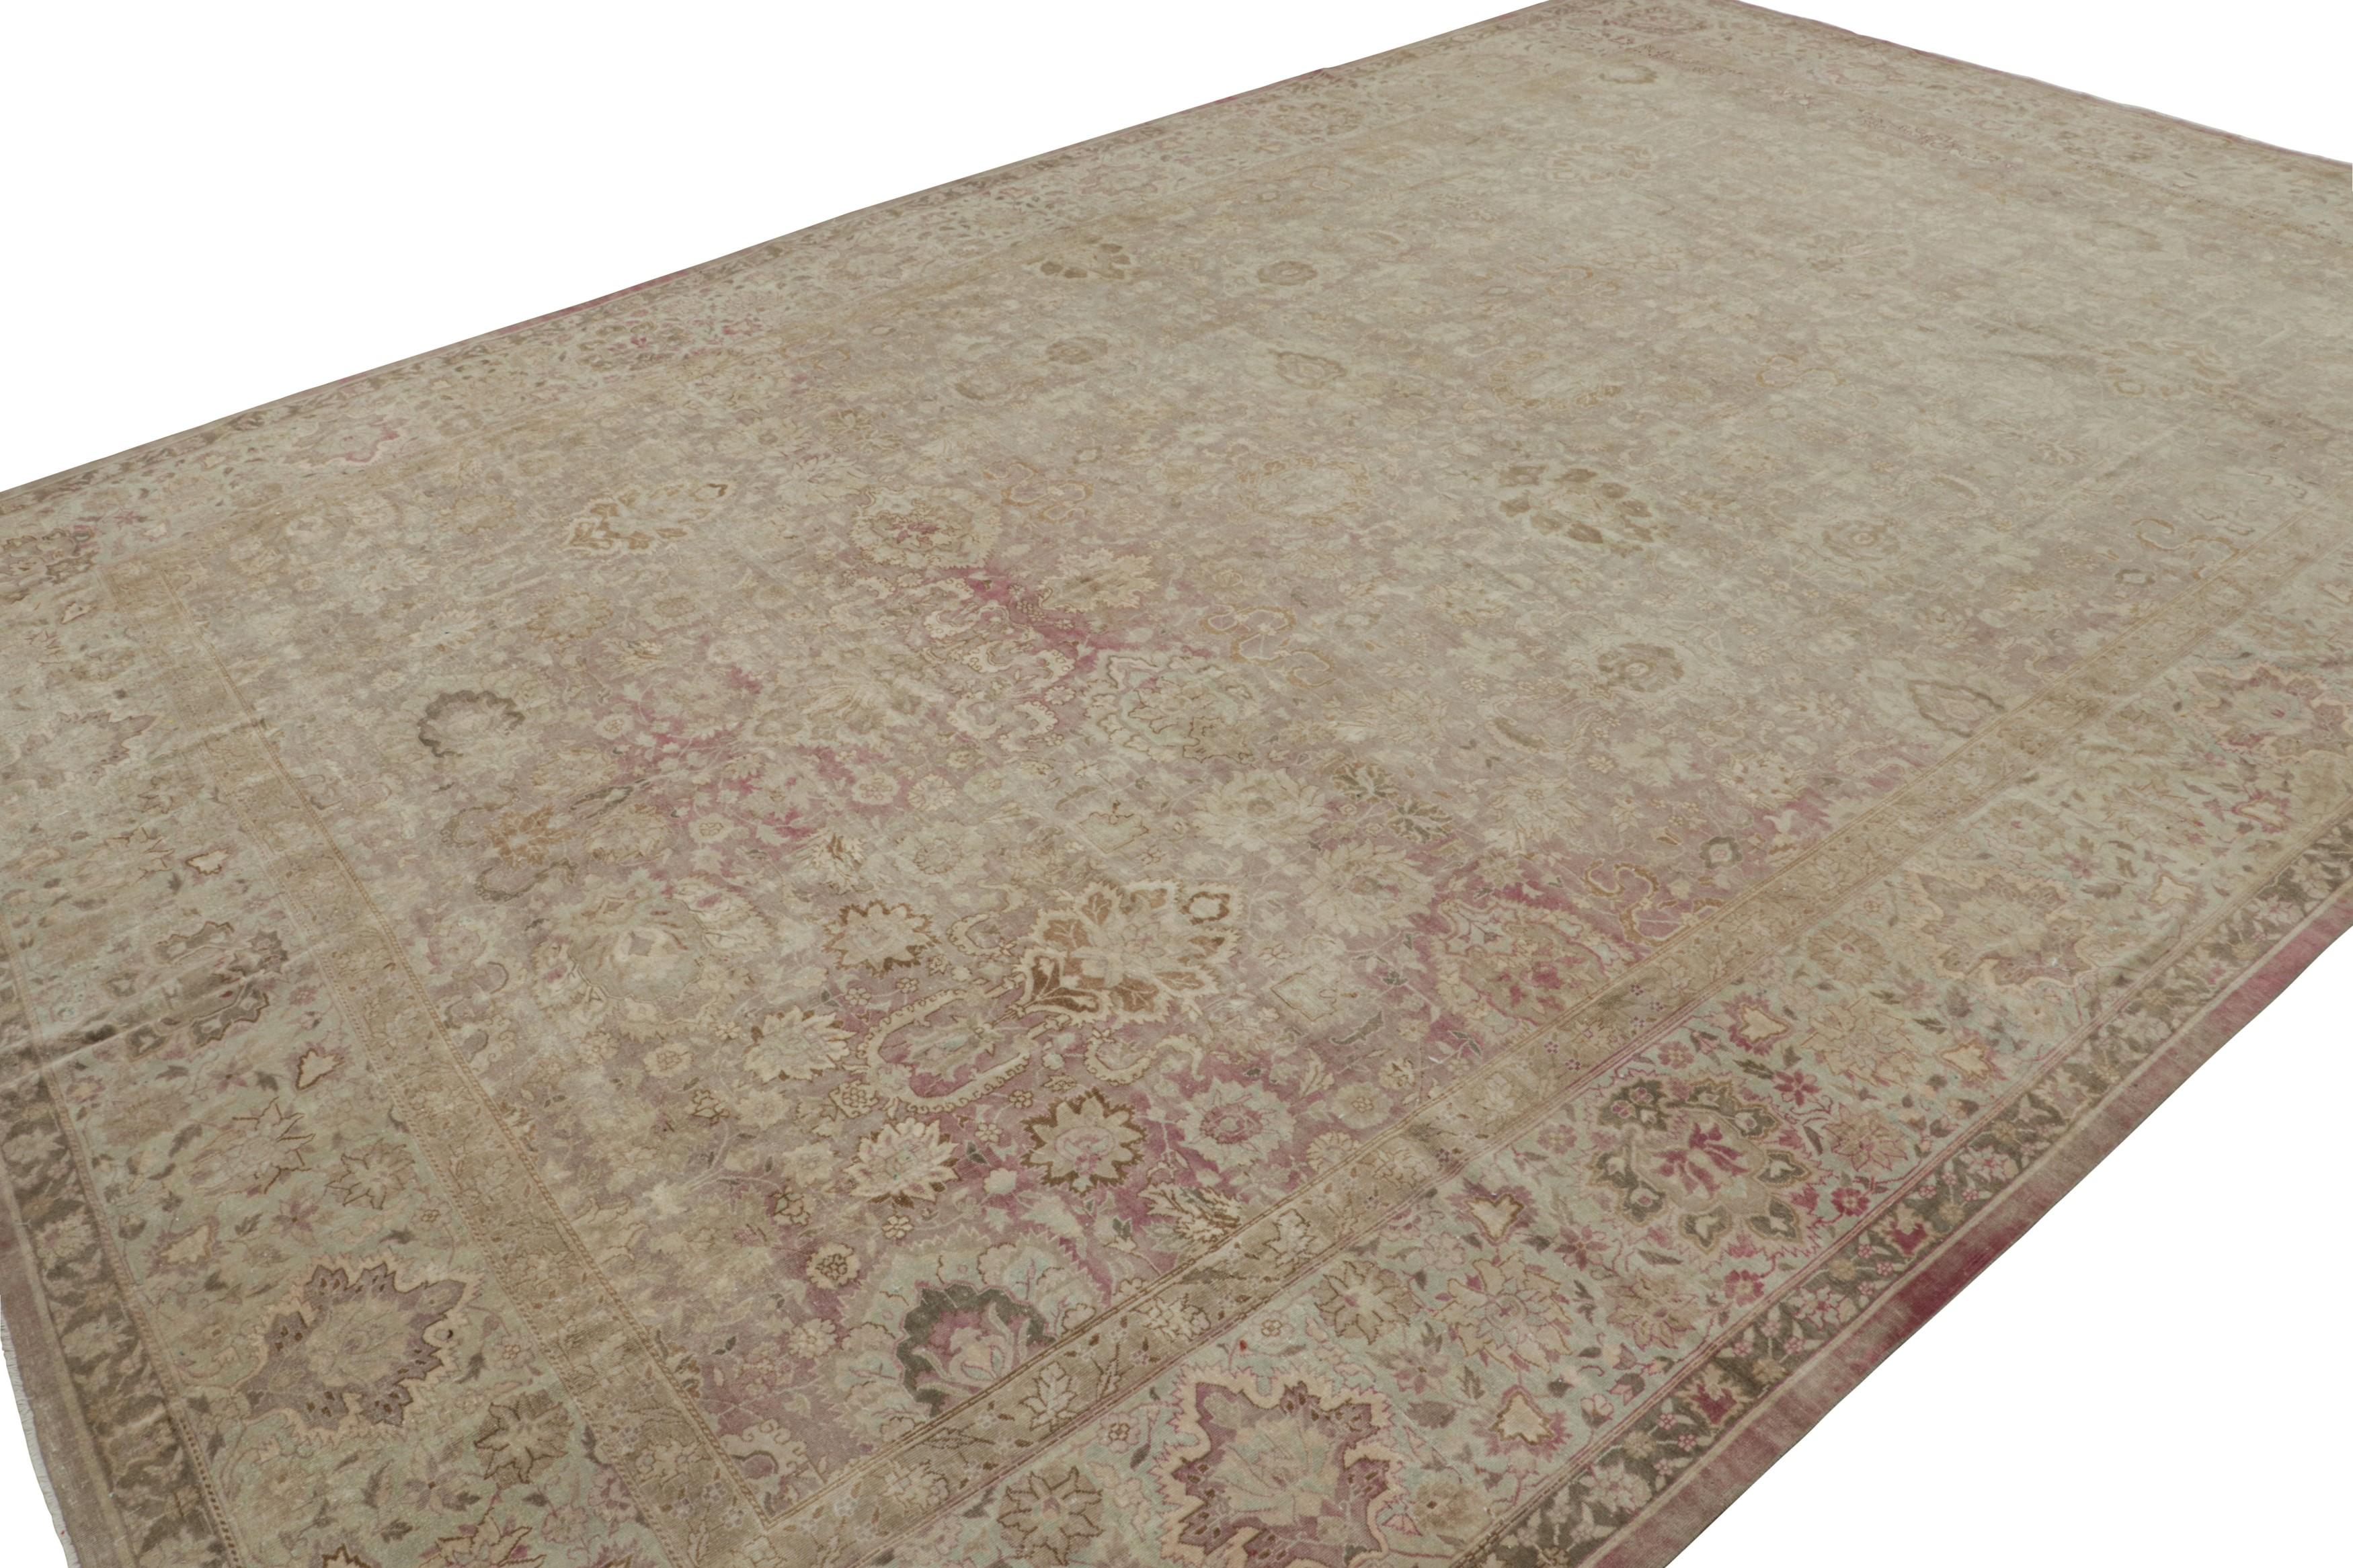 Hand-knotted in wool, this 12x17 antique Larestan rug, originating from India, circa 1920-1930, is likely to be inspired by works of the same Persian region and its workshops. 

On the Design: 

Featuring a beige-brown with a raspberry field, this